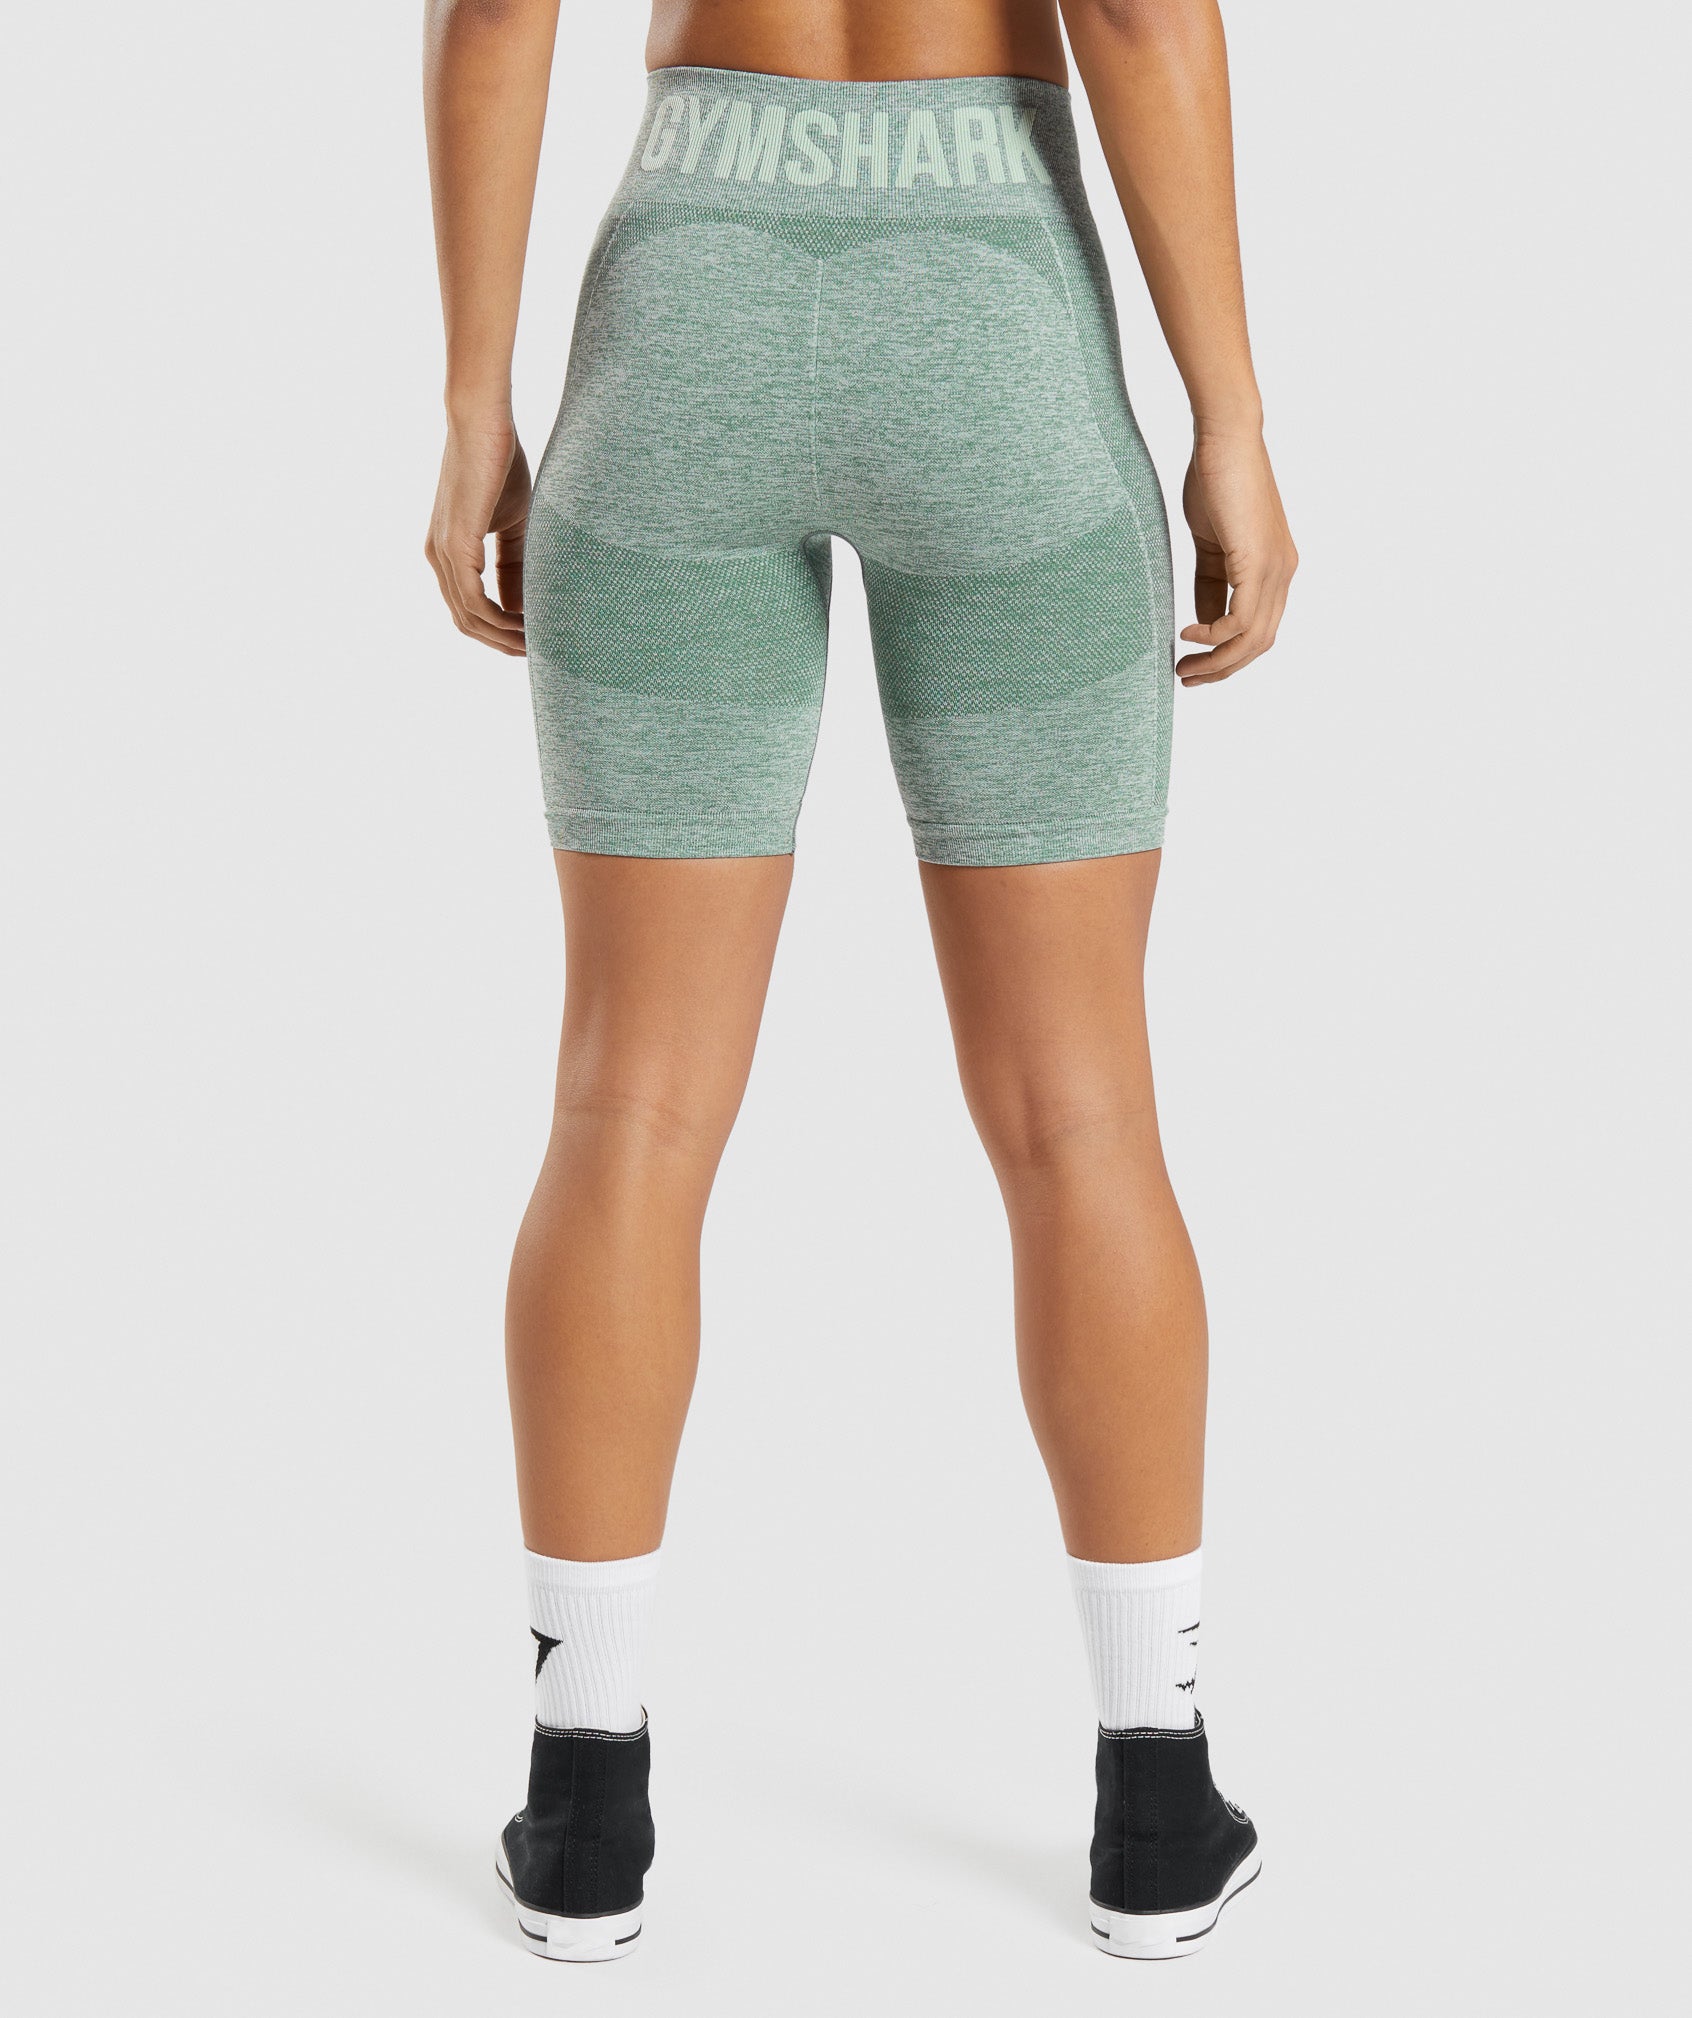 EVERYTHING MUST GO Gymshark FLEX - Cycling Shorts - Women's - lime green  marl/ light grey marl - Private Sport Shop